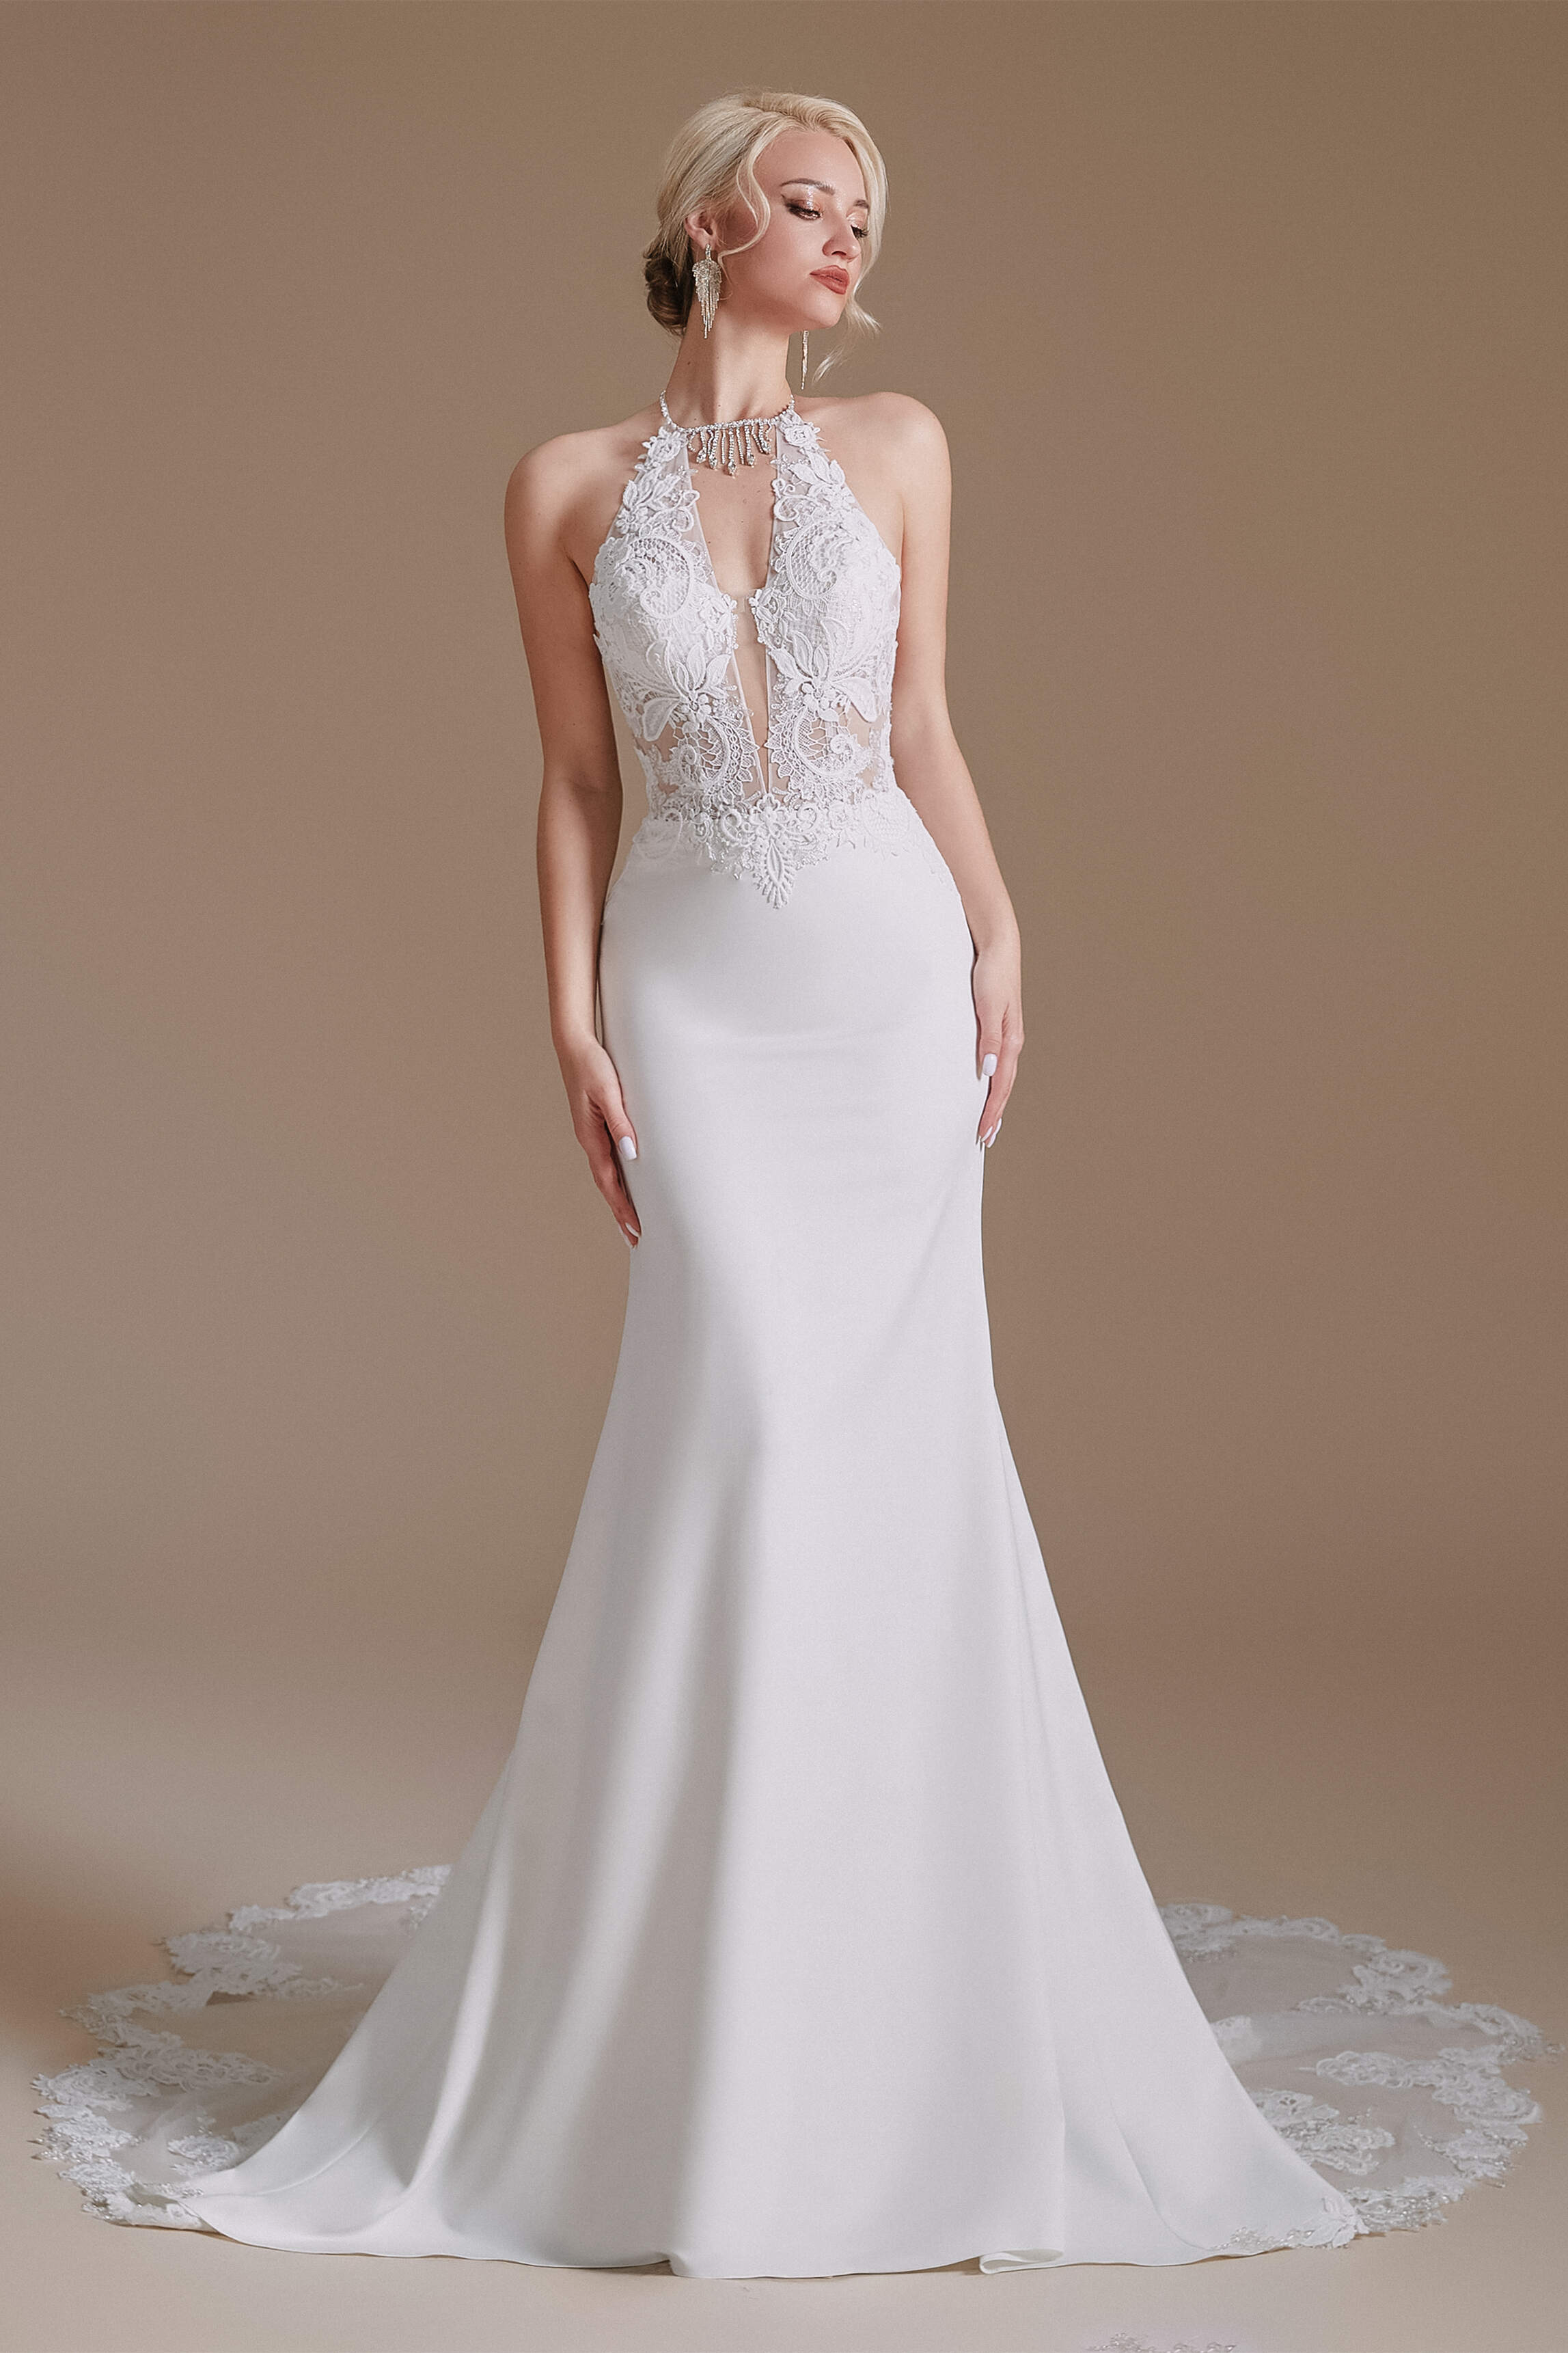 Wedding Dress Outfits, White Mermaid Halter Backless Sweep Train Wedding Dresses with Lace